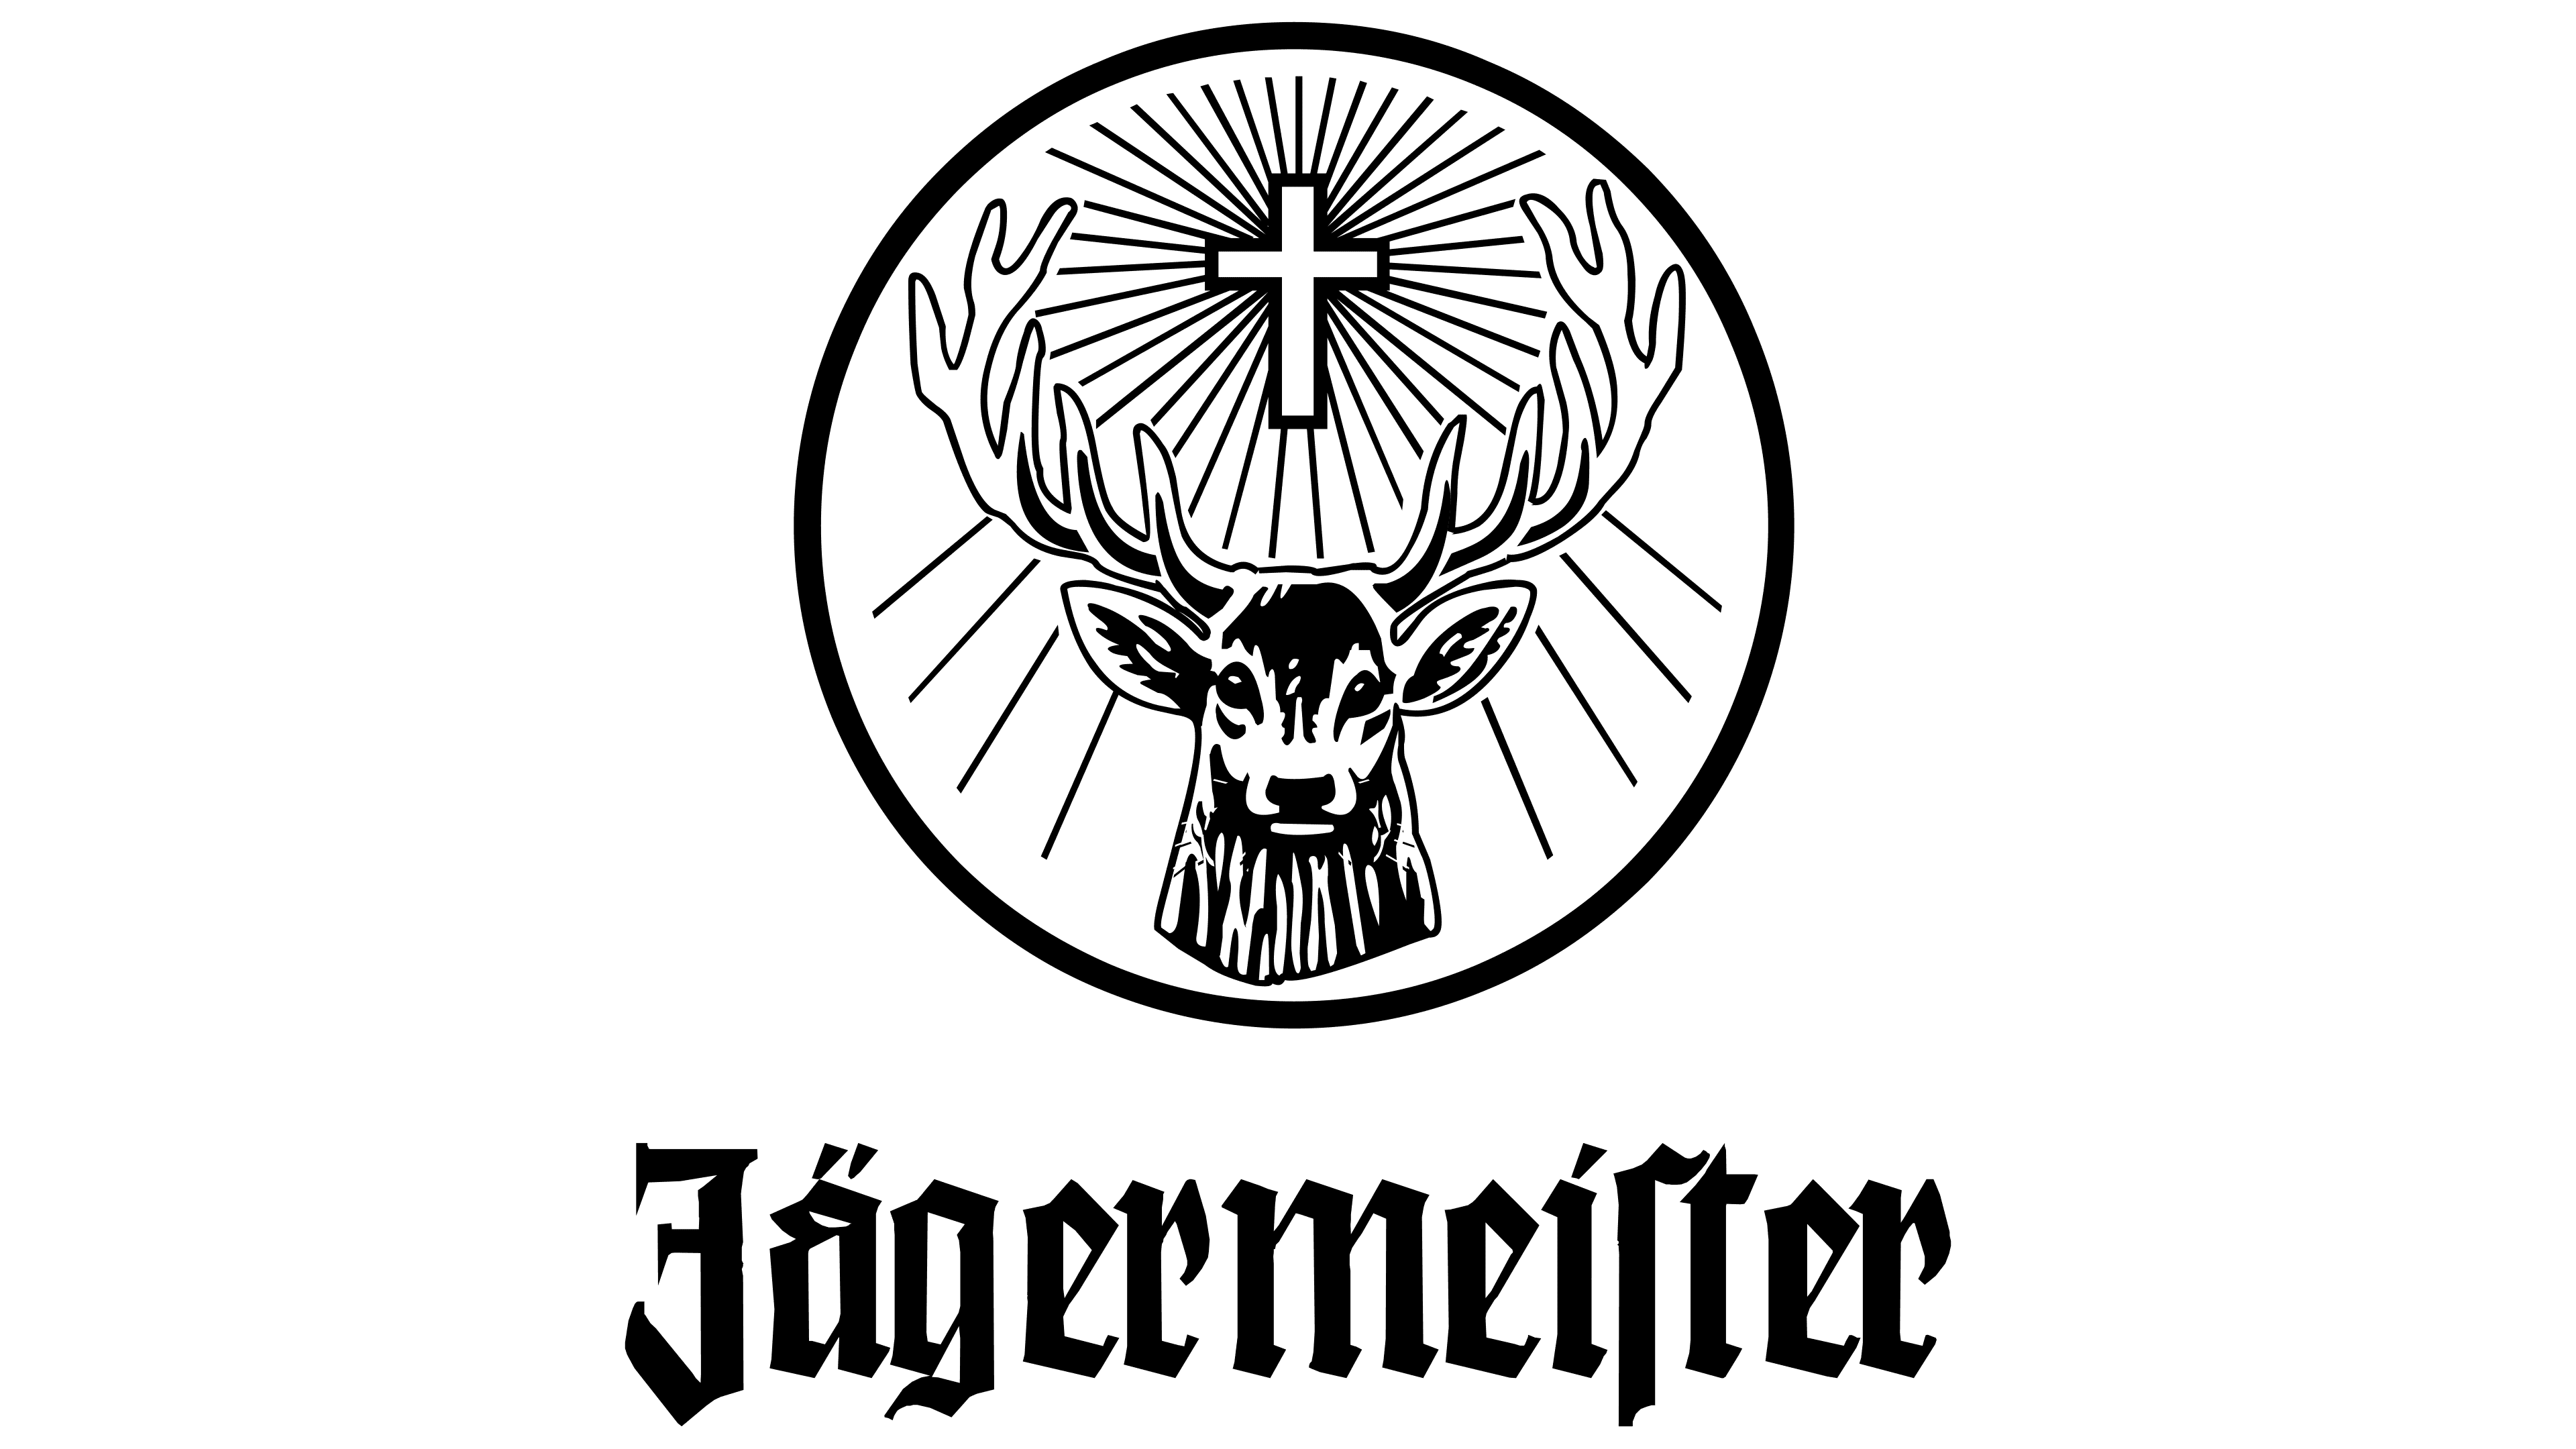 Jagermeister Logo The Most Famous Brands And Company Logos In The World